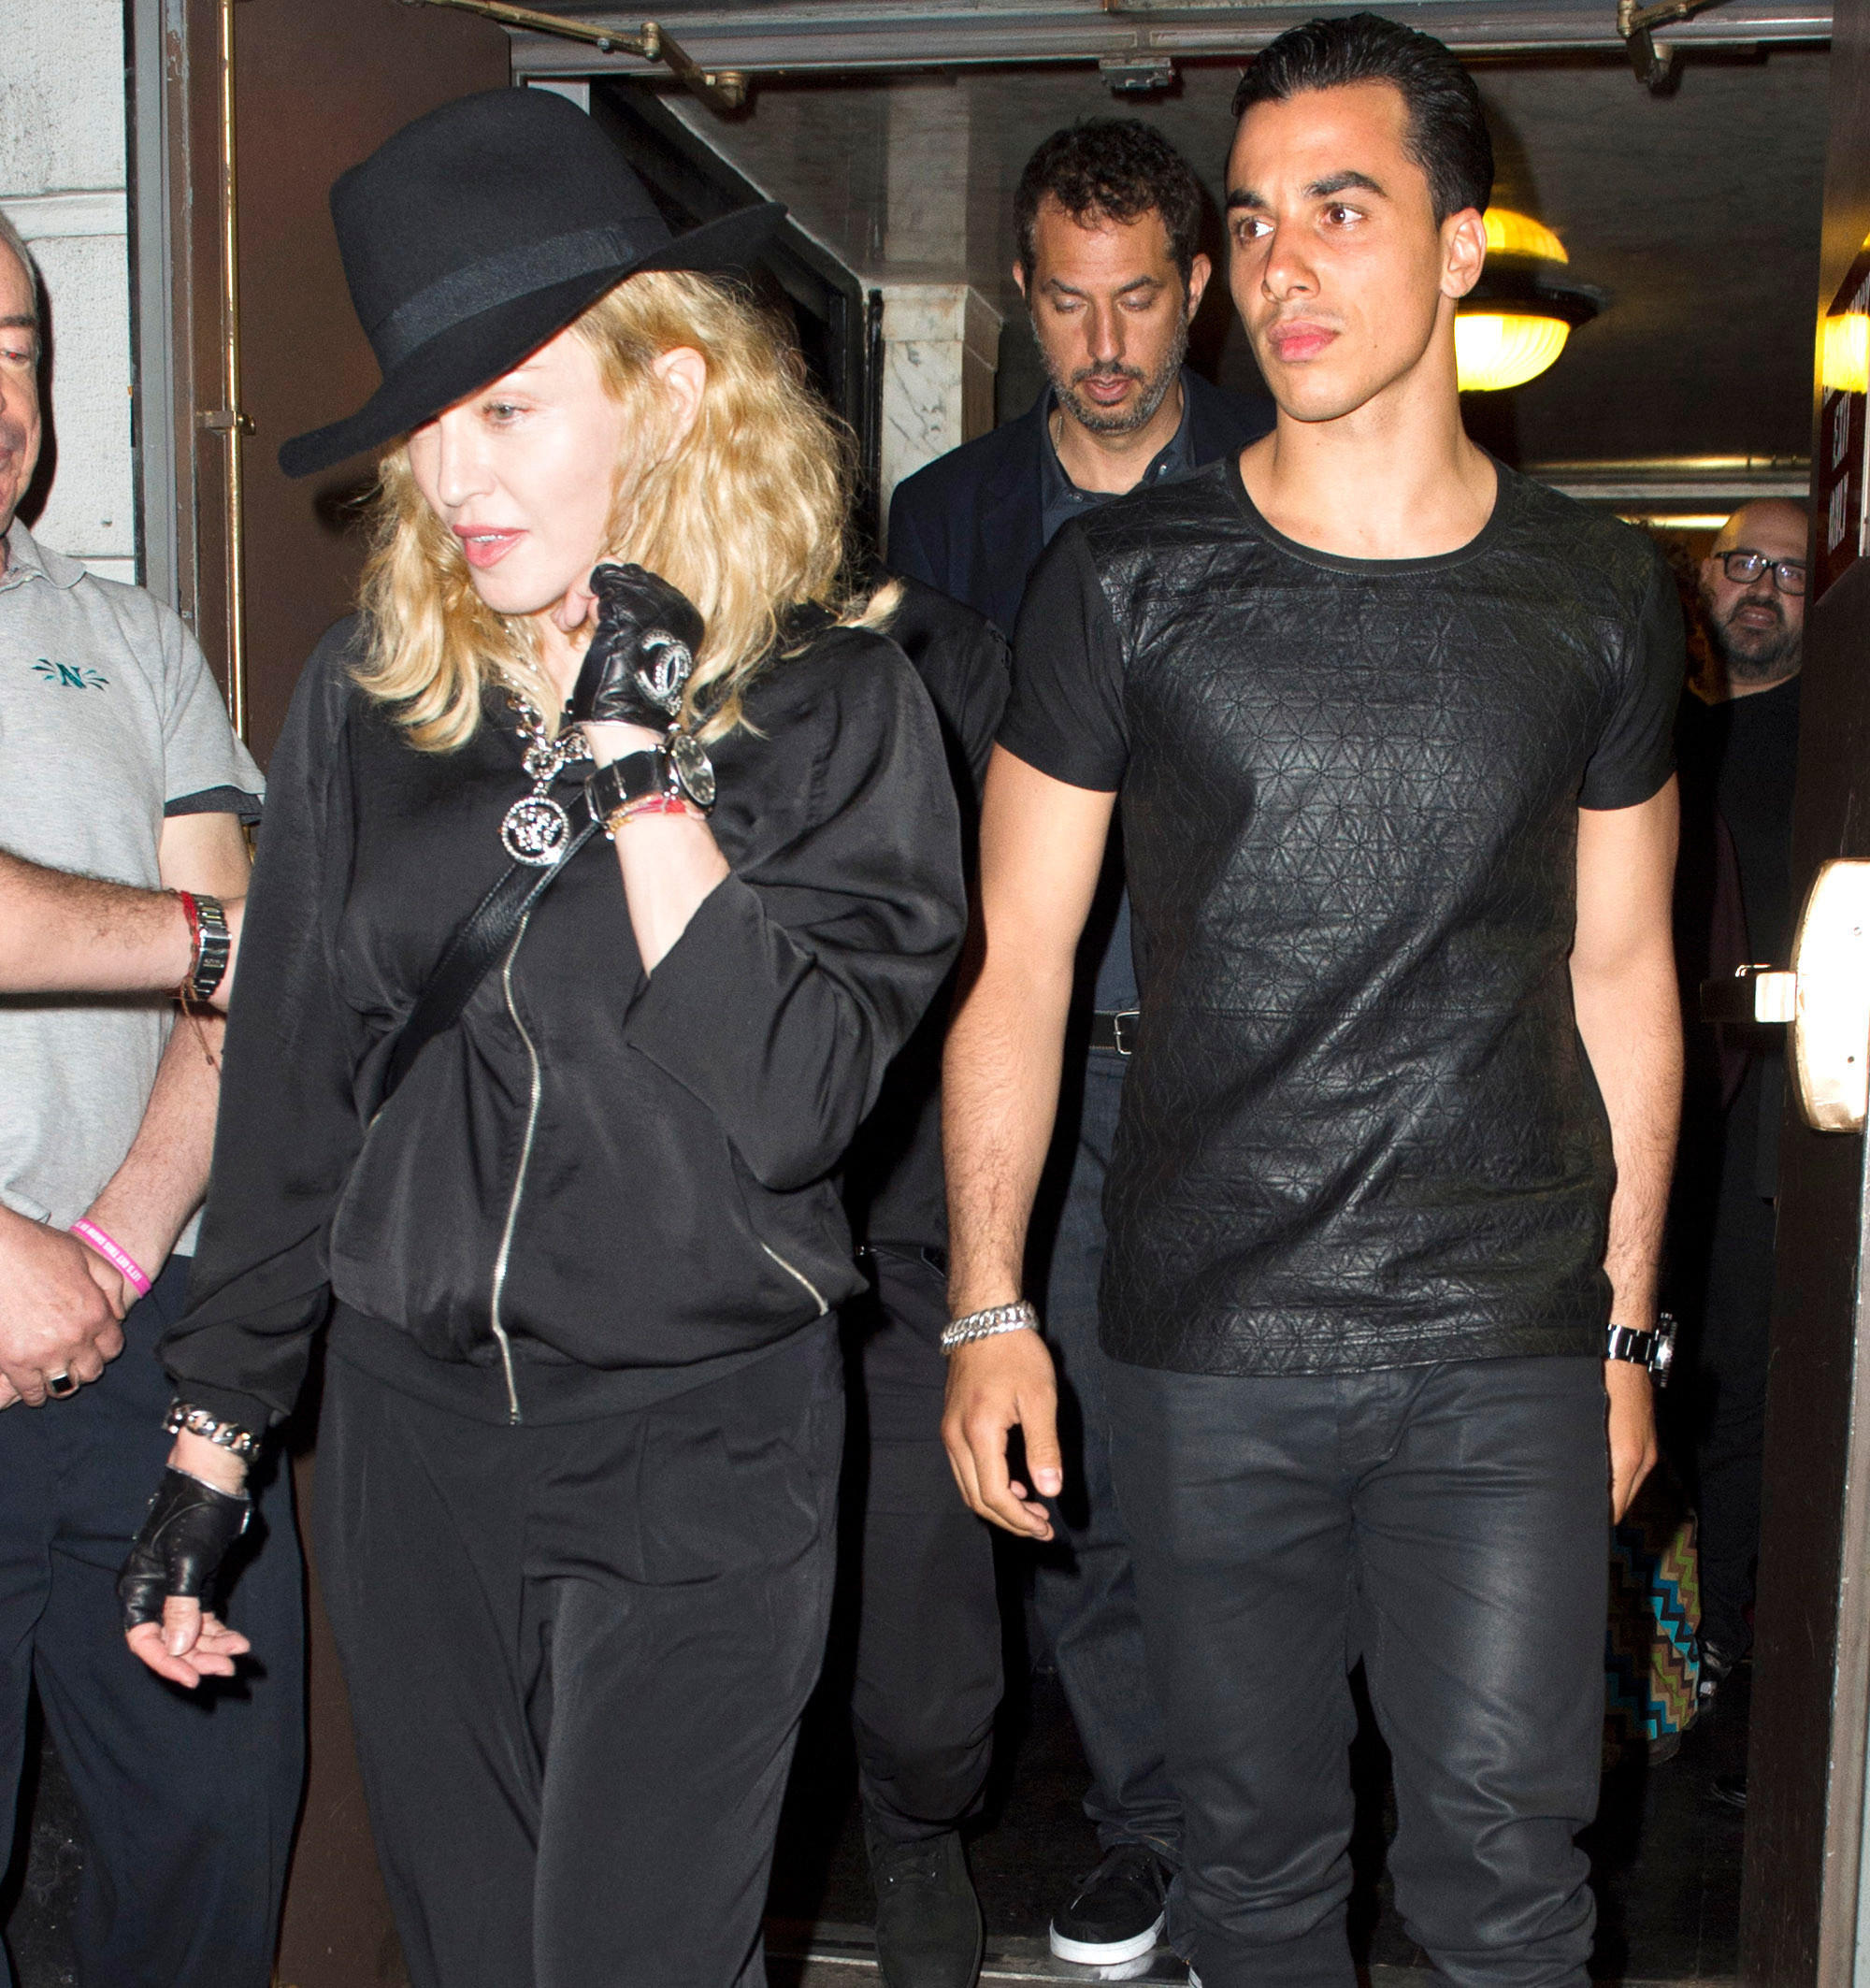 Madonna and Timor Steffens, Age gap: 29 years